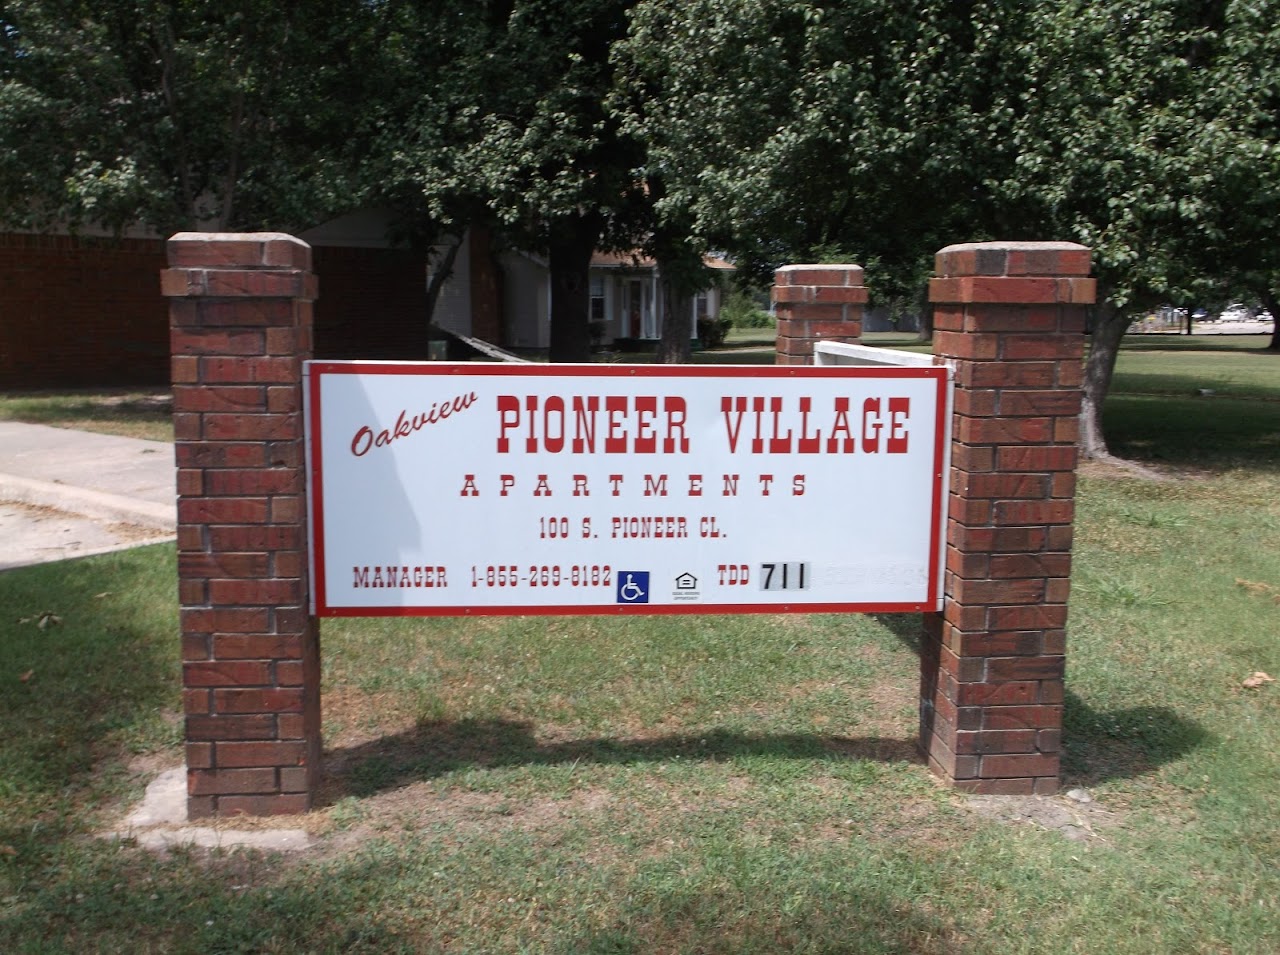 Photo of OAKVIEW PIONEER VILLAGE II. Affordable housing located at 604 FLOYD BOX DR TISHOMINGO, OK 73460